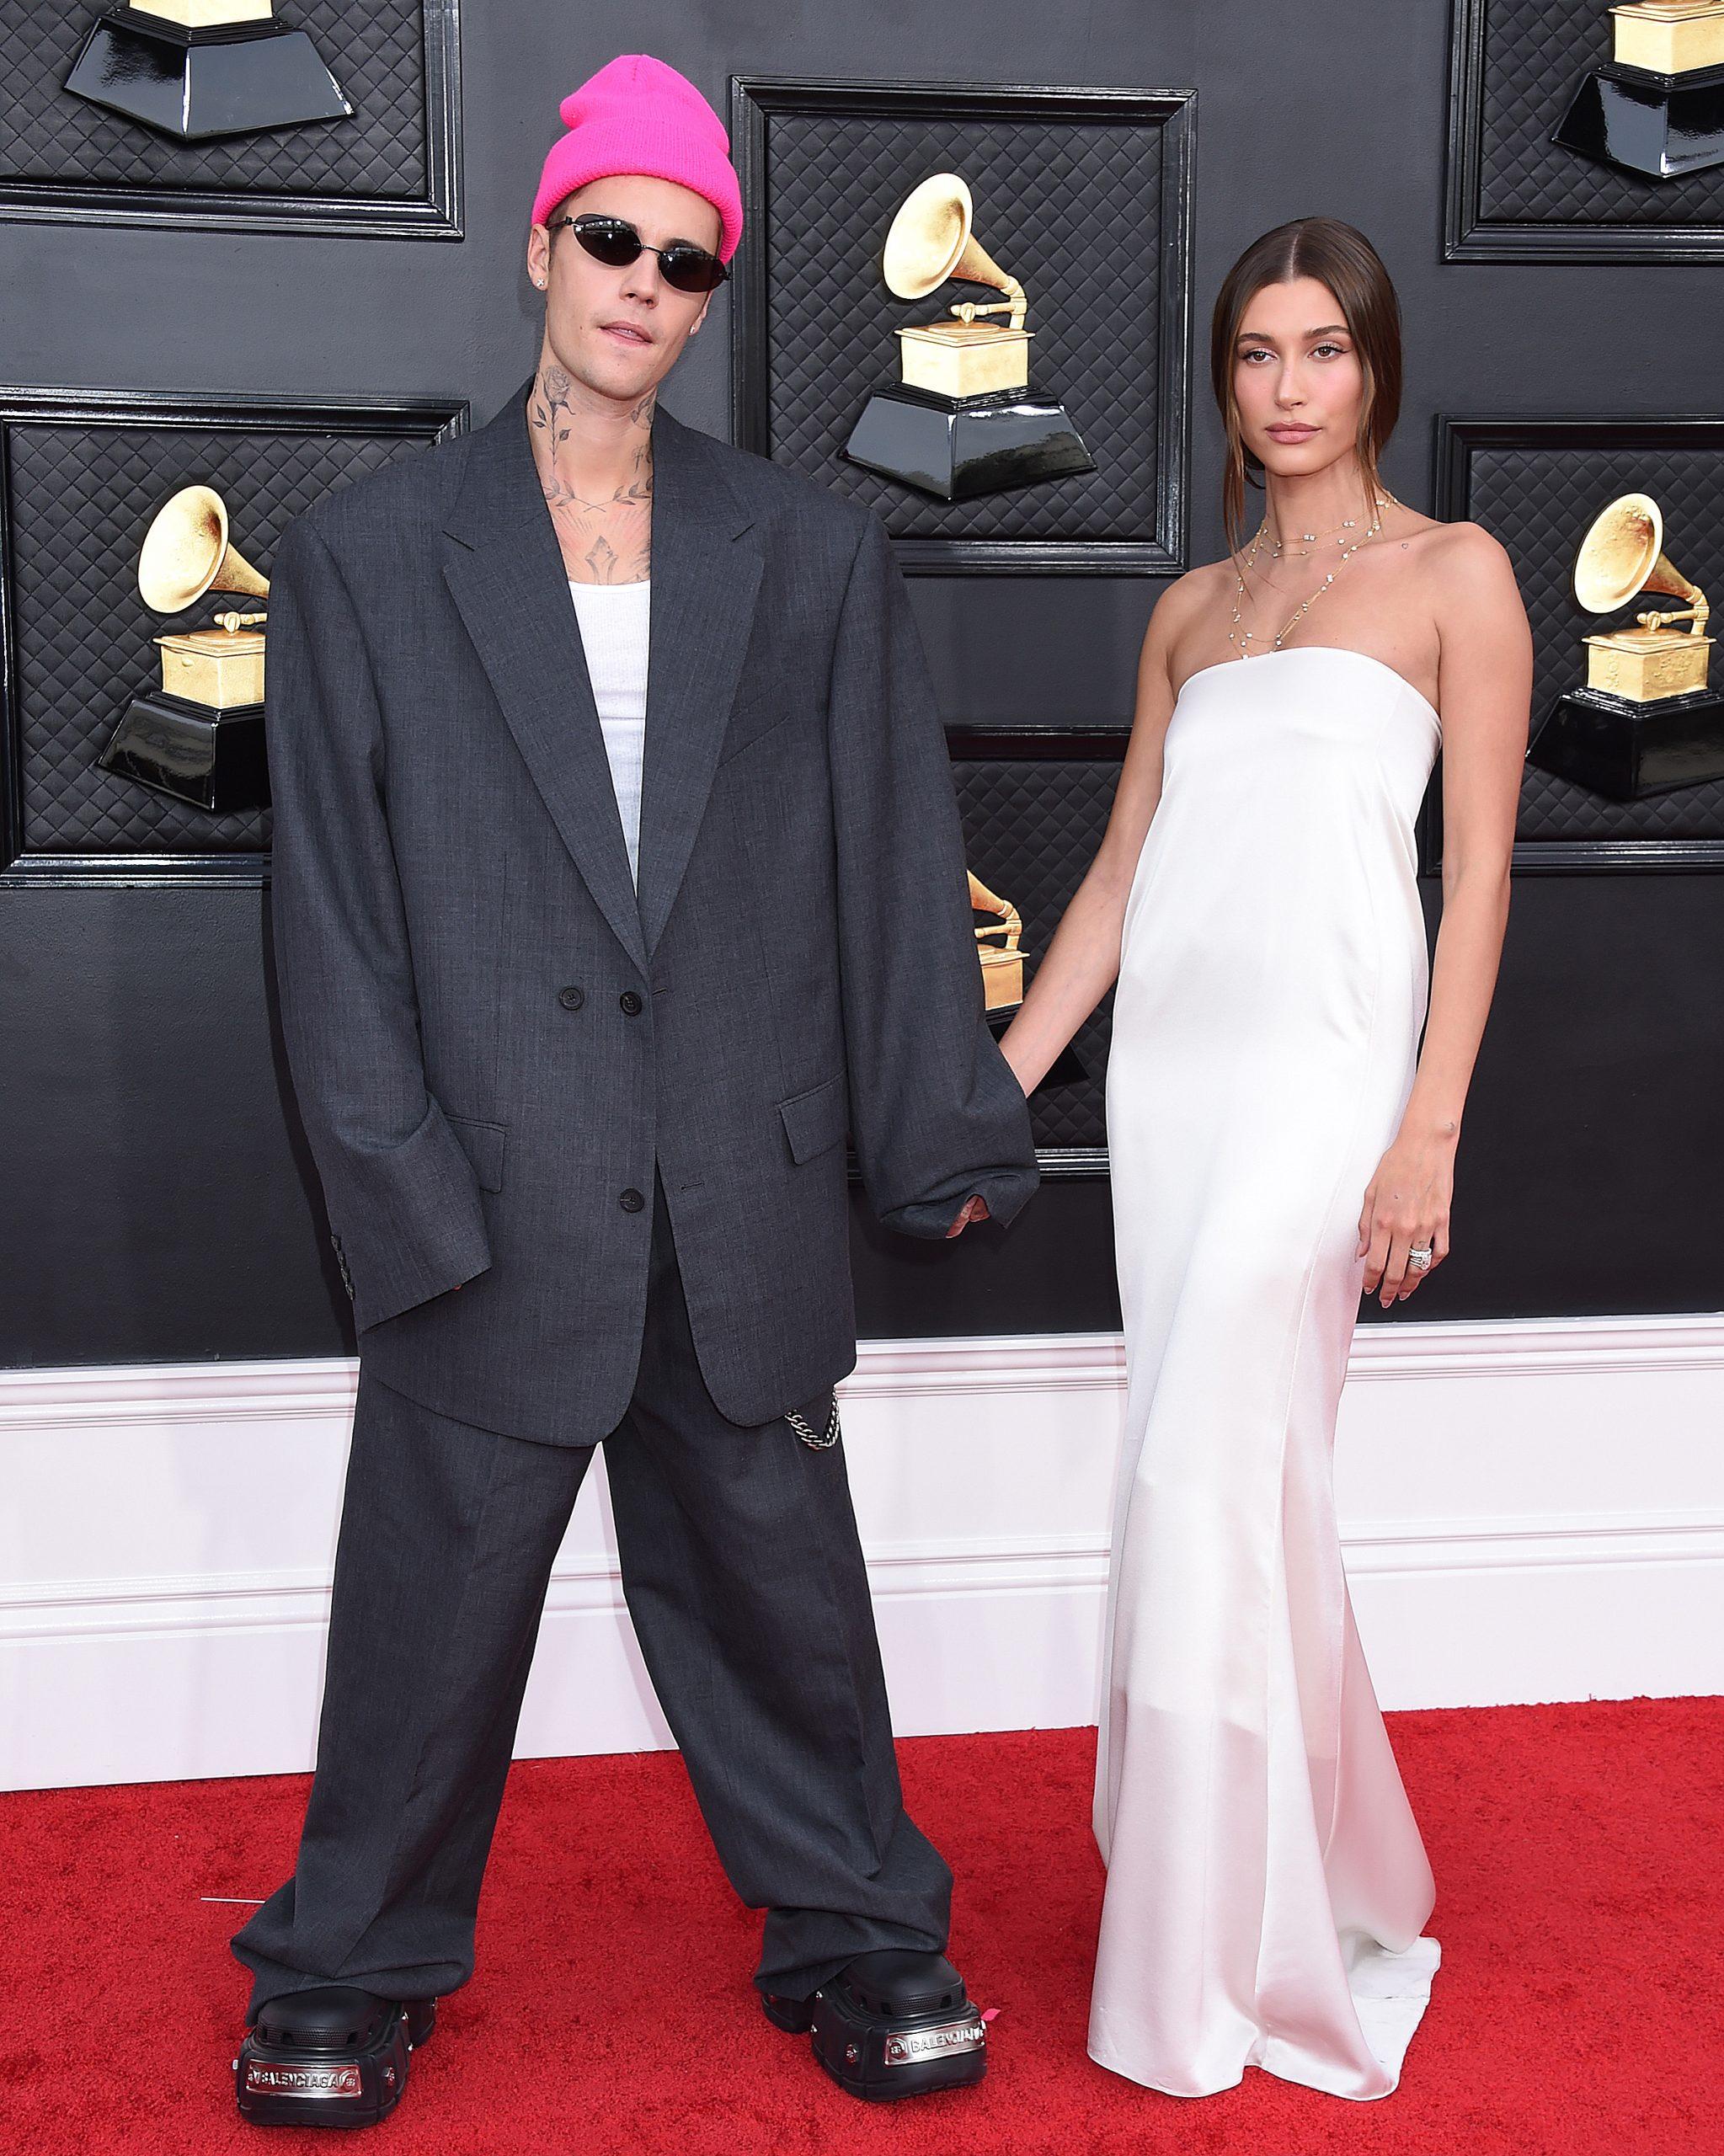 Hailey at The 64th Annual GRAMMY Awards